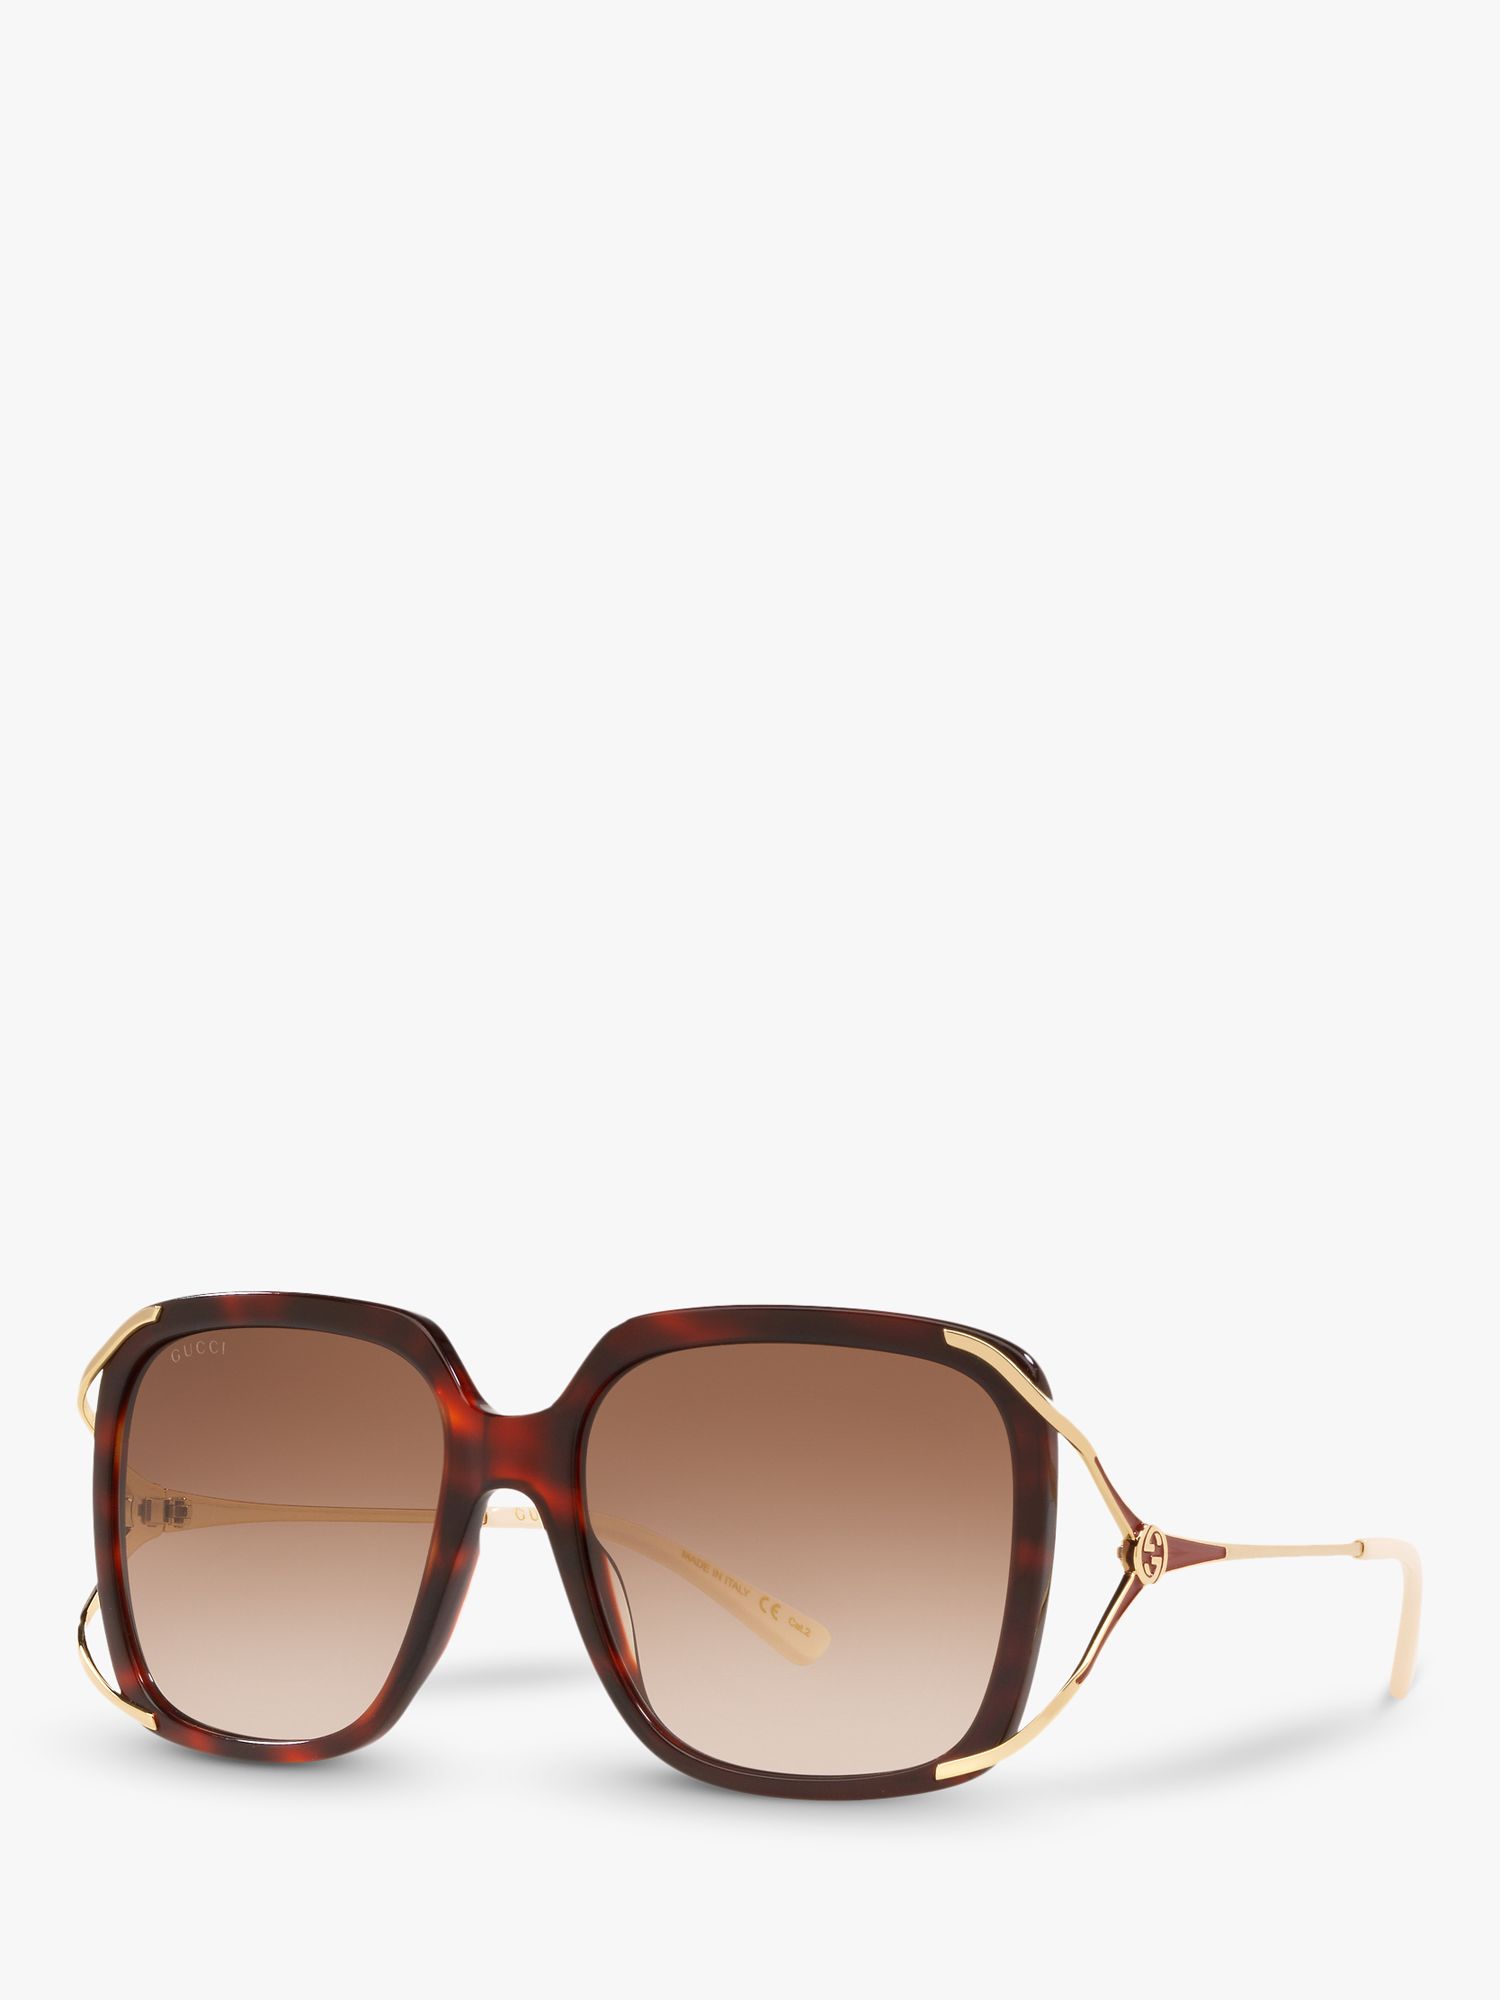 Gucci GG0647S Women's Statement Square Sunglasses, Red Havana/Brown  Gradient at John Lewis & Partners